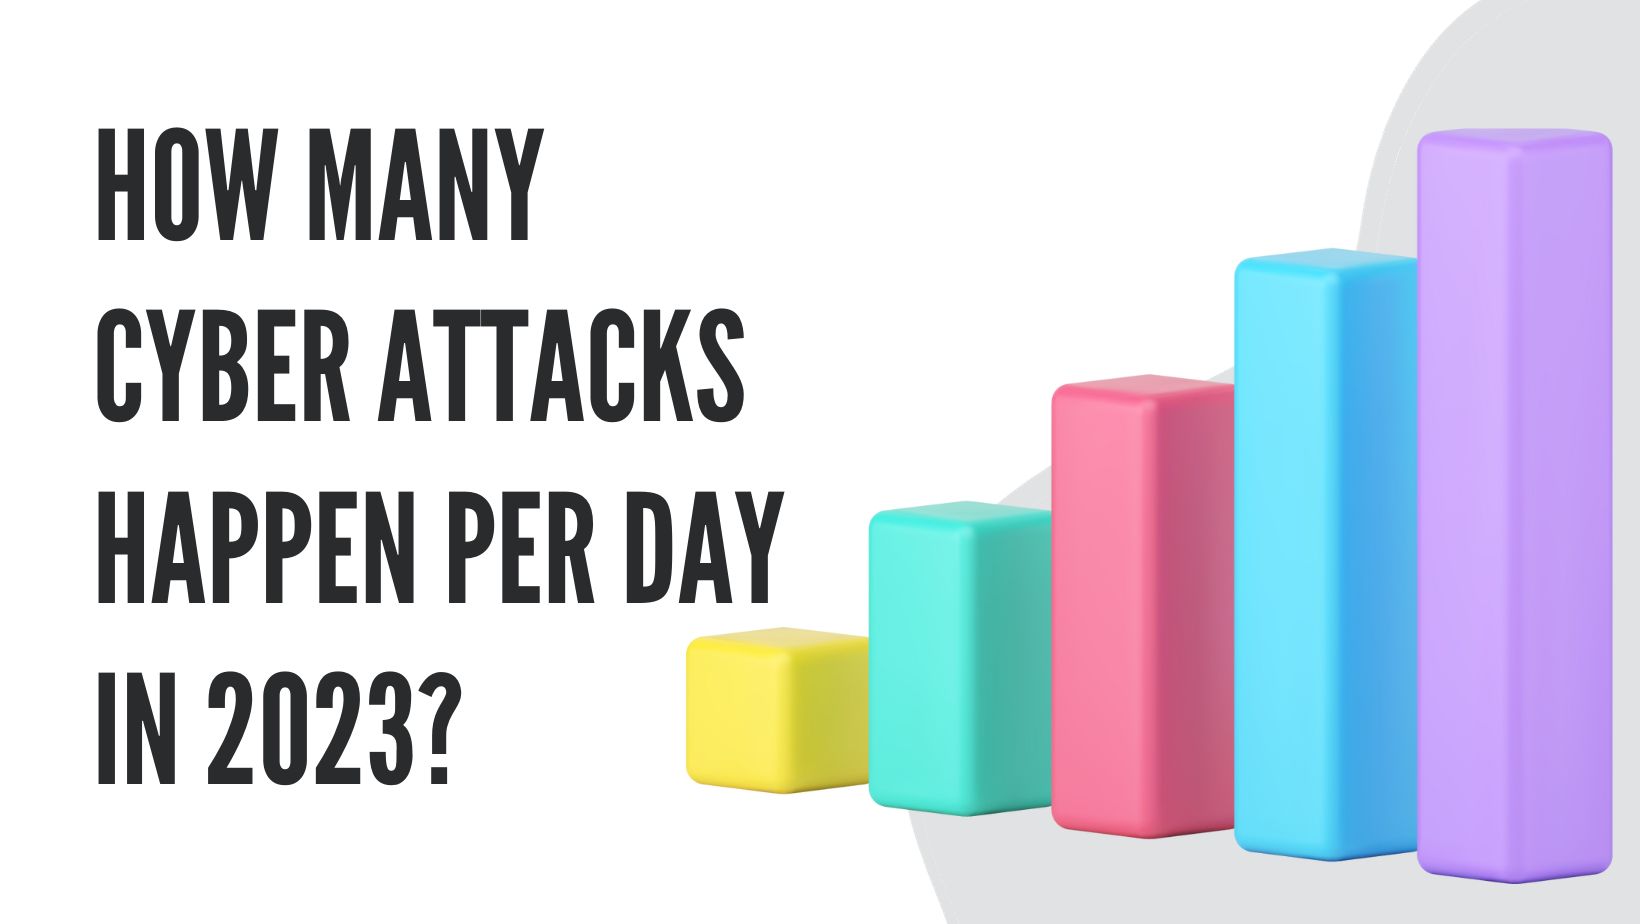 How Many Cyber Attacks Happen Per Day in 2023?